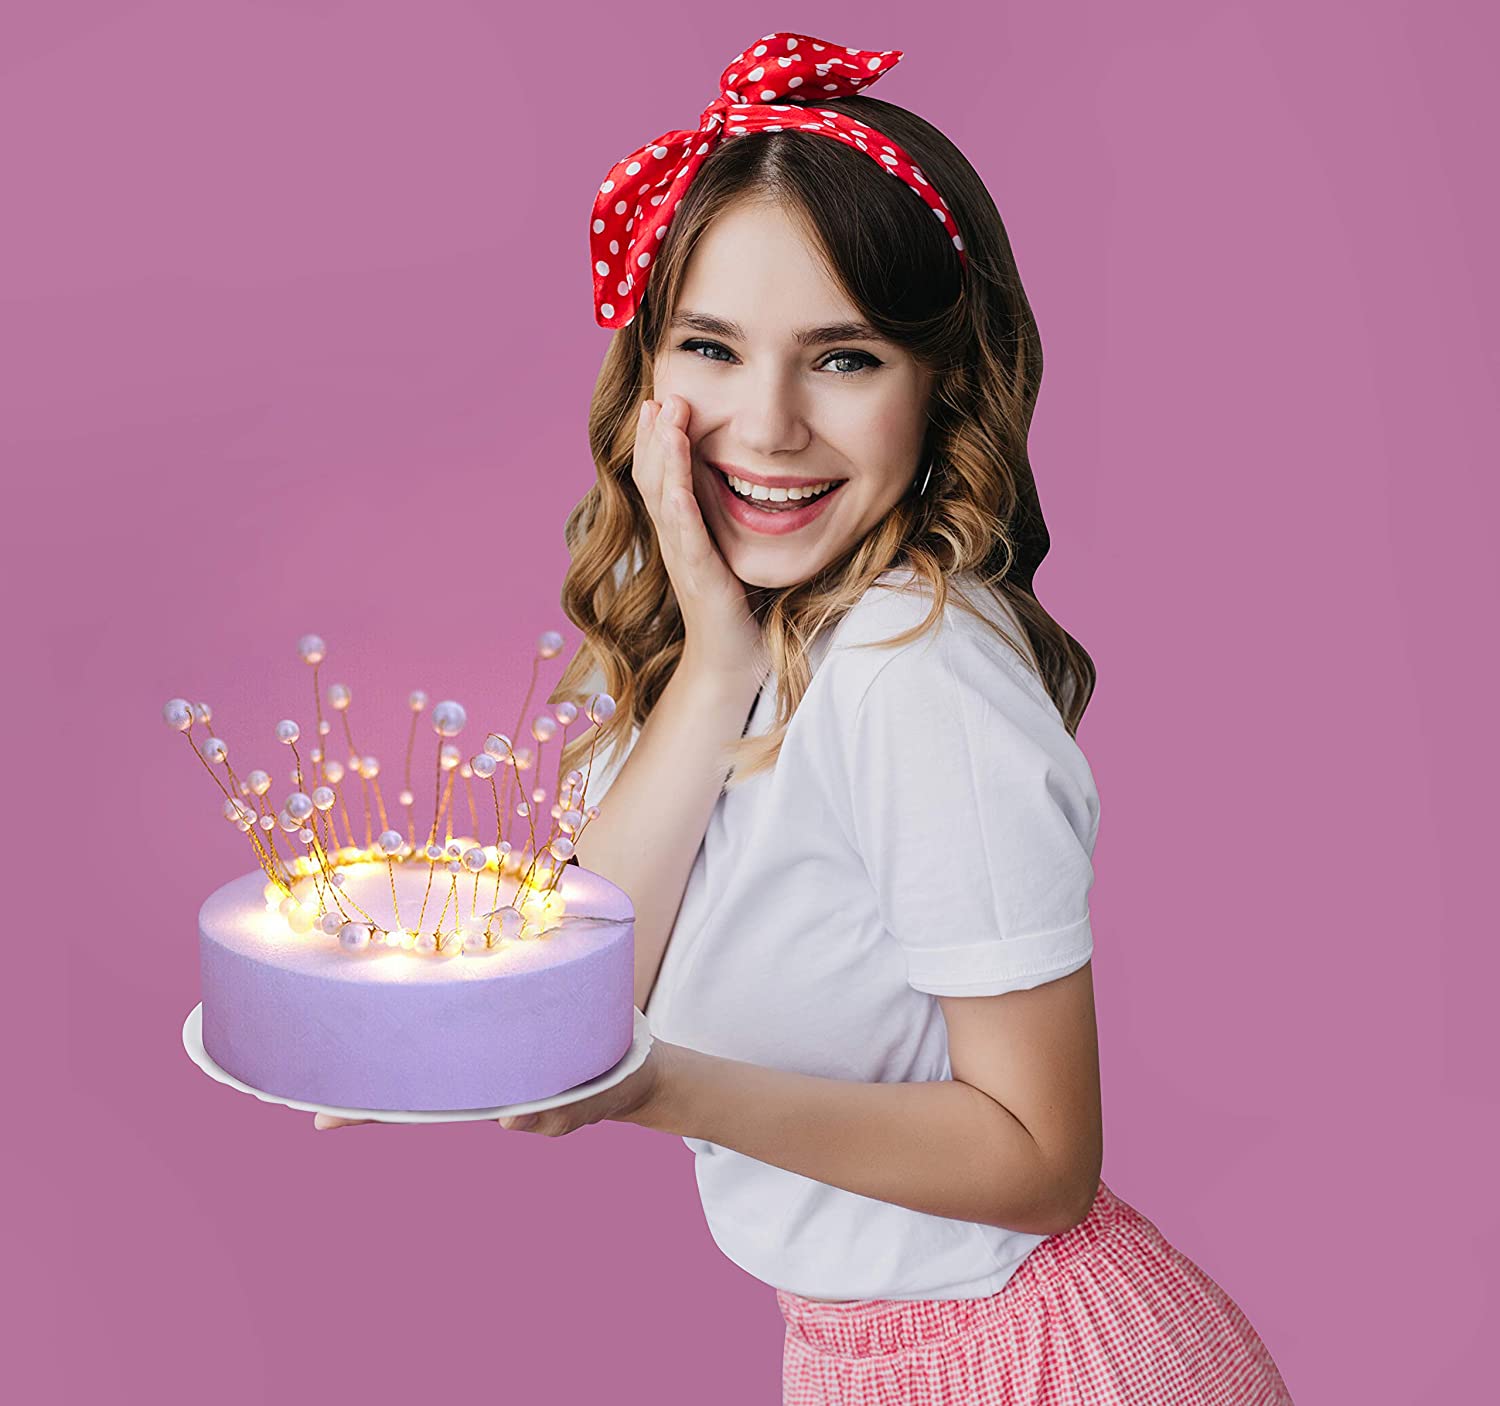 Free Photos - A Little Girl Is Holding A Cake With Three Lit Candles On It,  Smiling As She Poses For The Photo. The Cake Appears To Be A Delicious  White Cake,